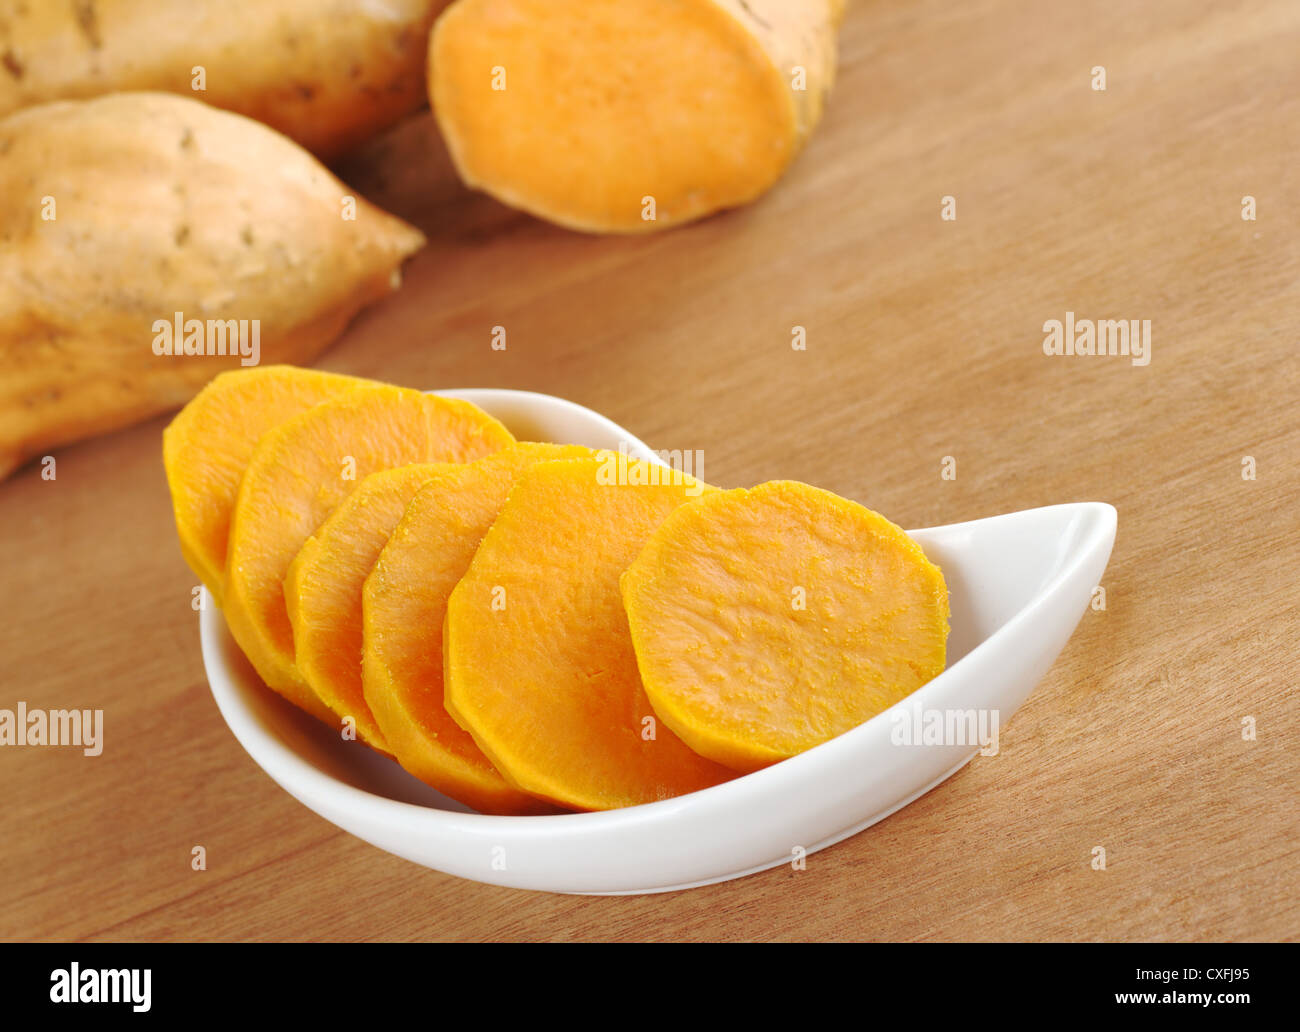 Cooked sweet potato (lat. Ipomoea batatas) cut in slices in white bowl on wooden surface with raw sweet potatoes in the back Stock Photo